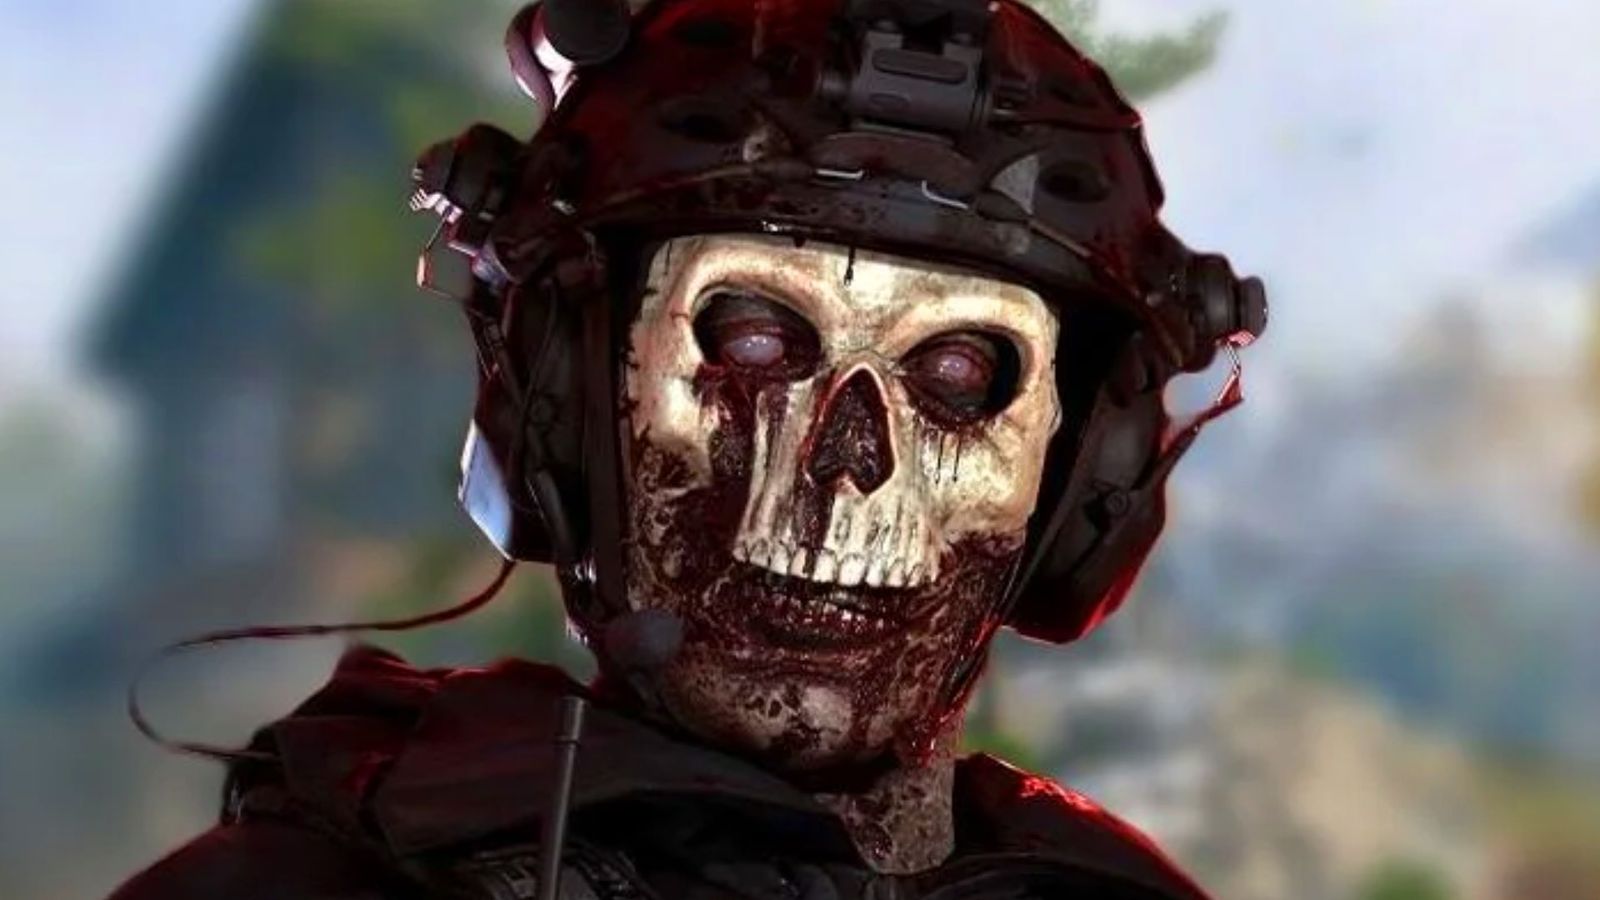 Microsoft services and Xbox down also here is zombie ghost from modern warfare 3